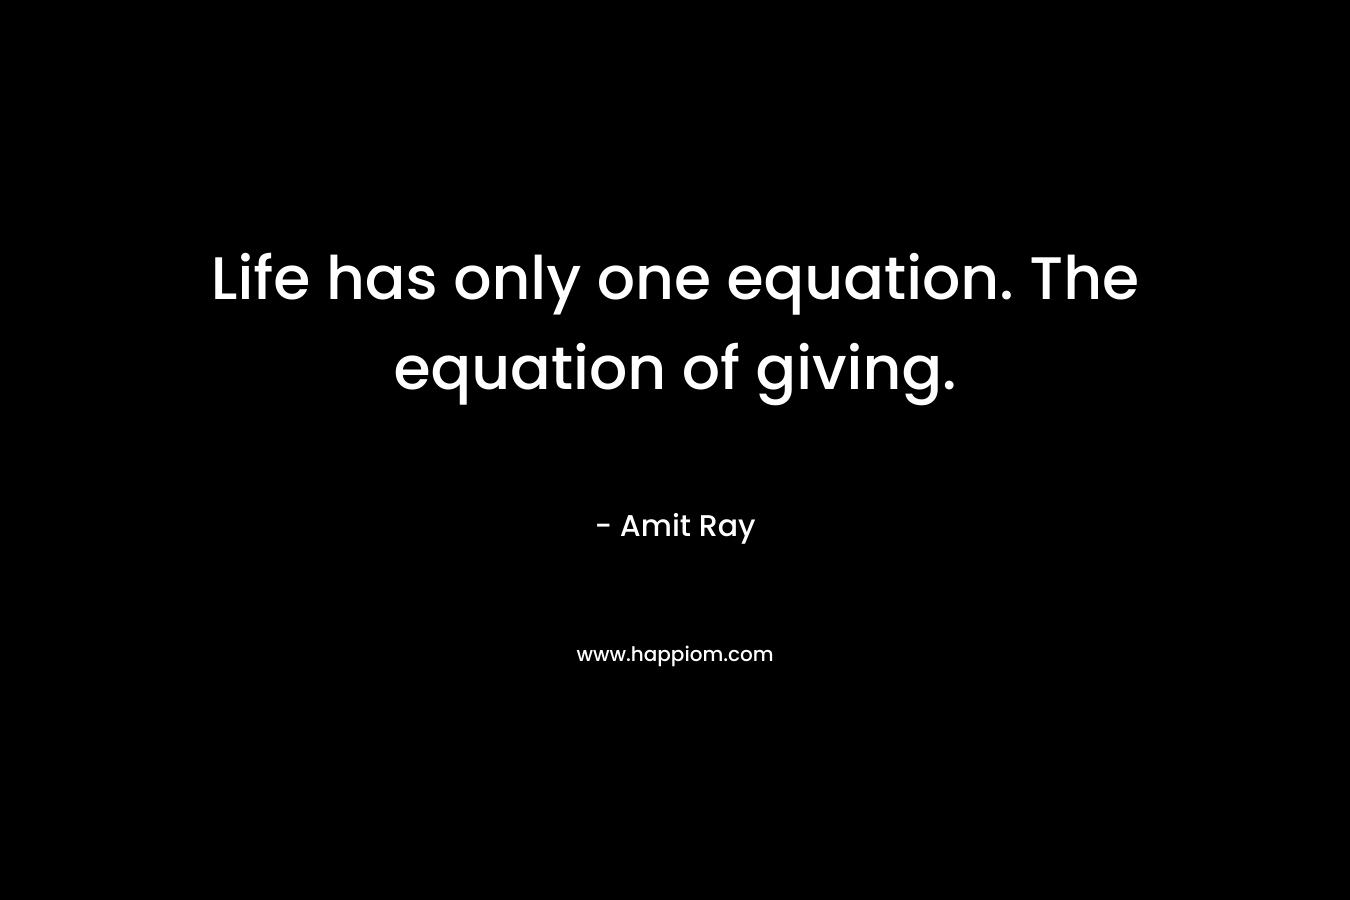 Life has only one equation. The equation of giving.